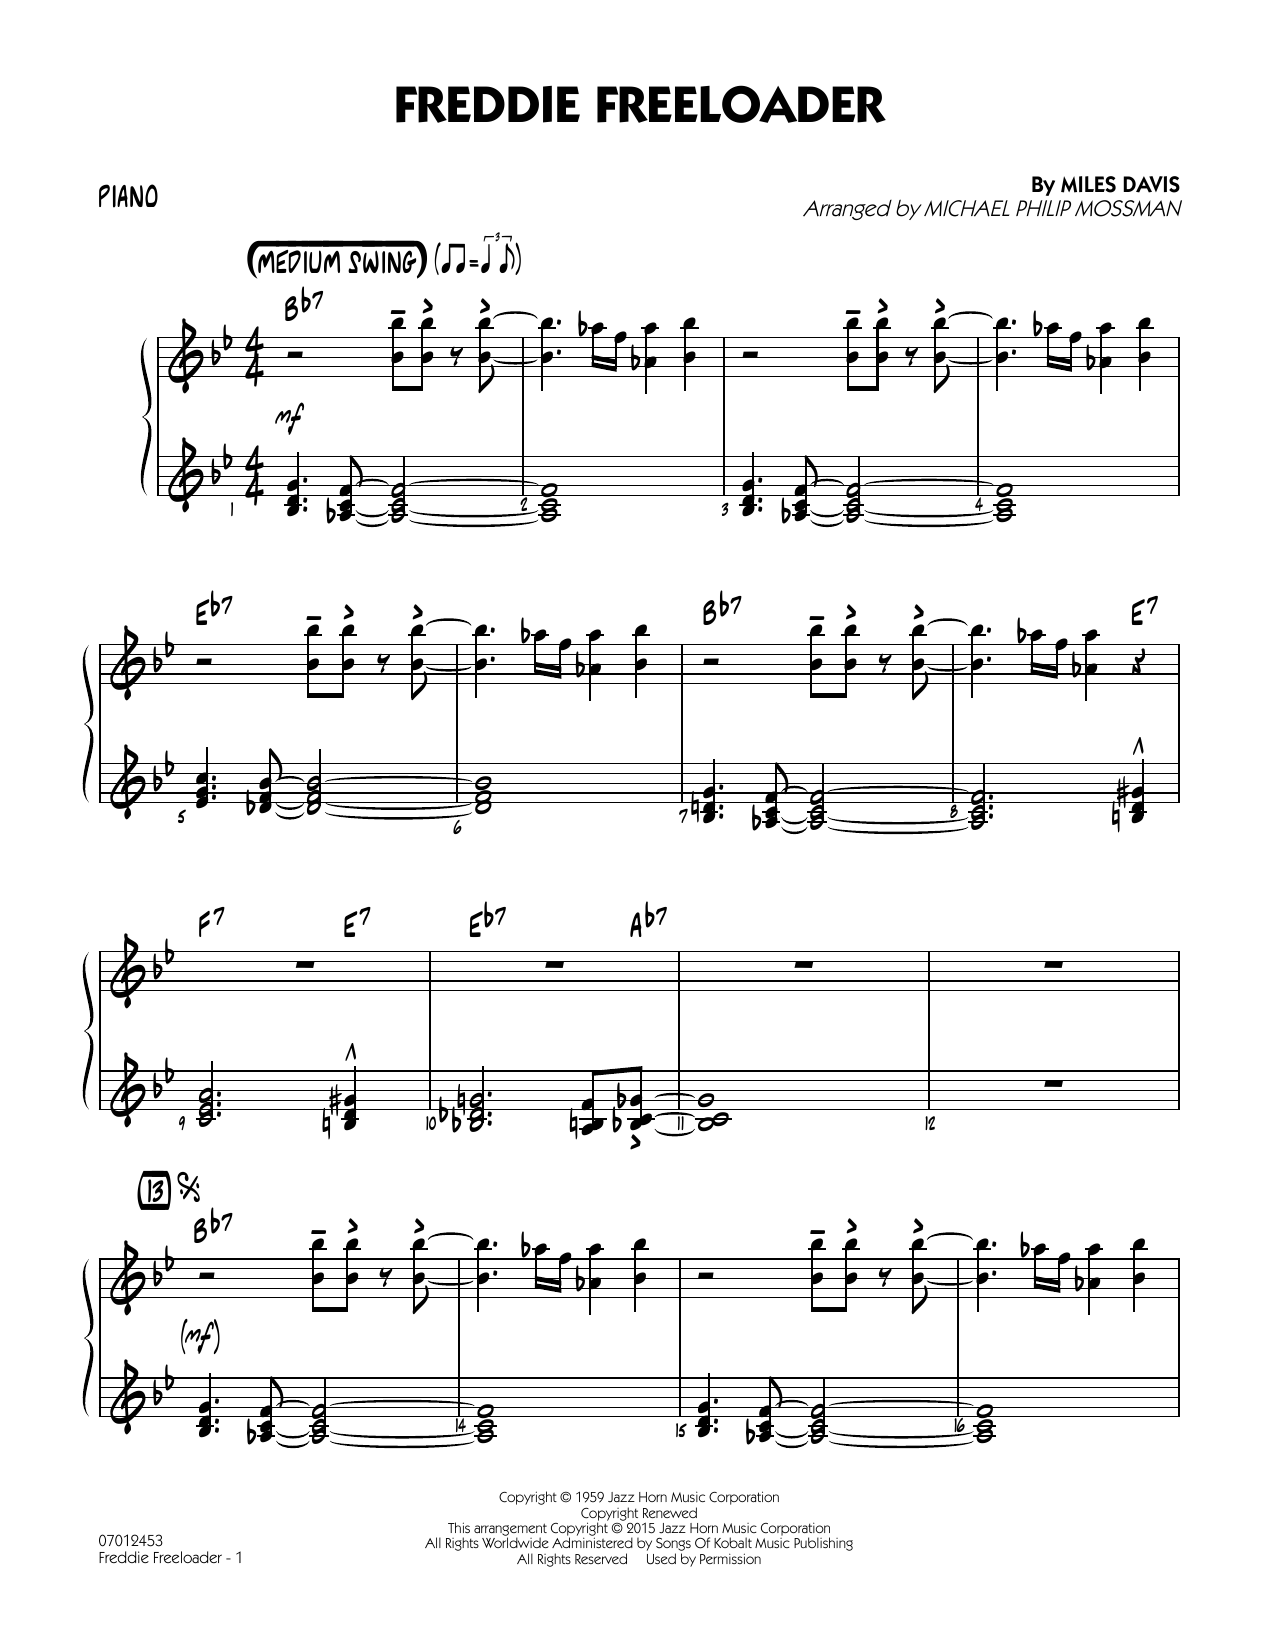 Michael Philip Mossman Freddie Freeloader - Piano sheet music notes and chords. Download Printable PDF.